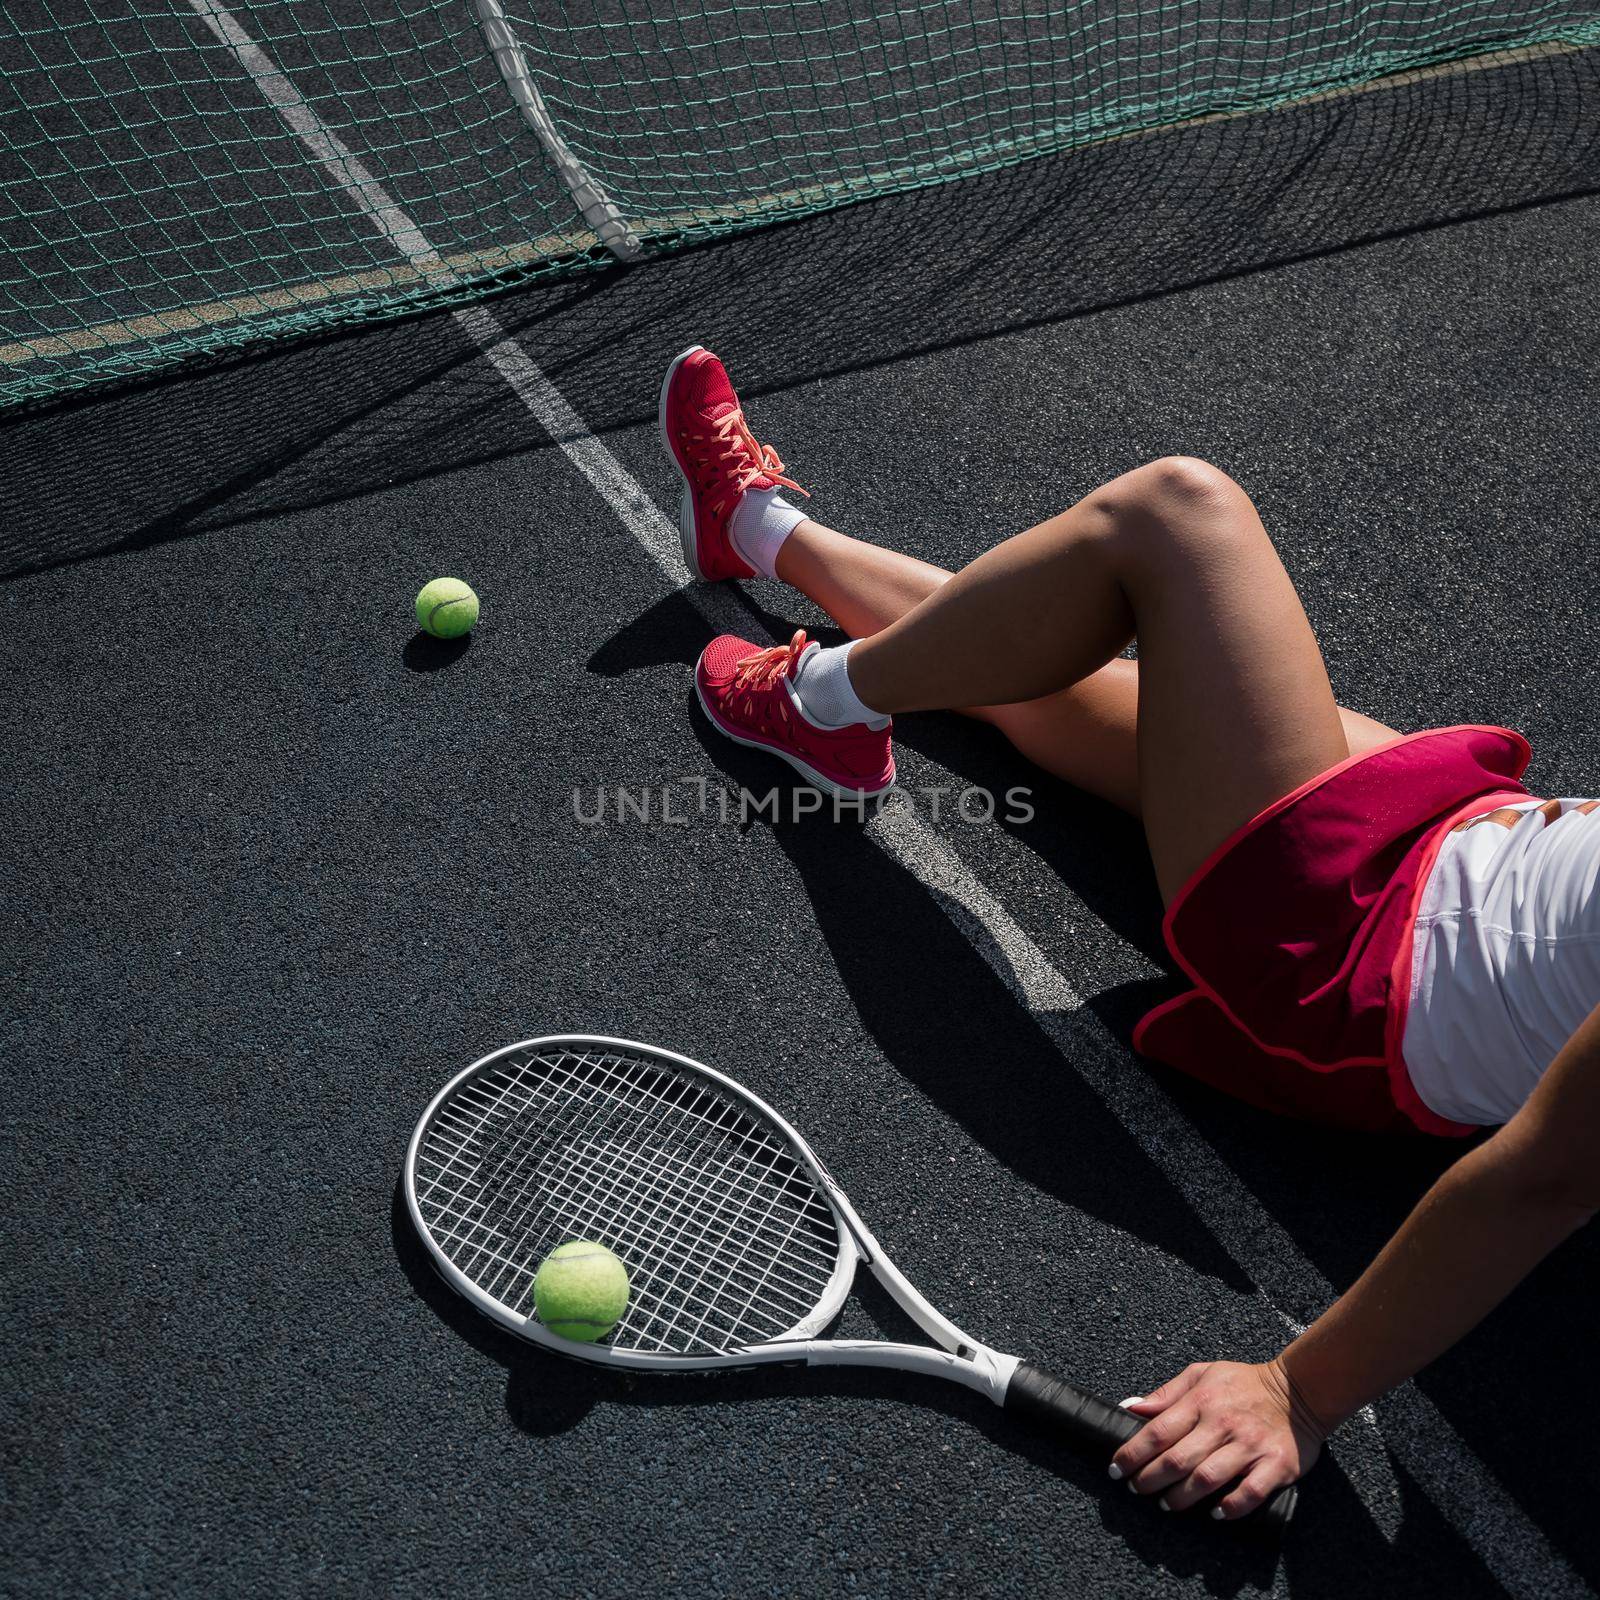 A faceless girl in a sports skirt sits on a tennis court and holds a rocket. Top view of female legs